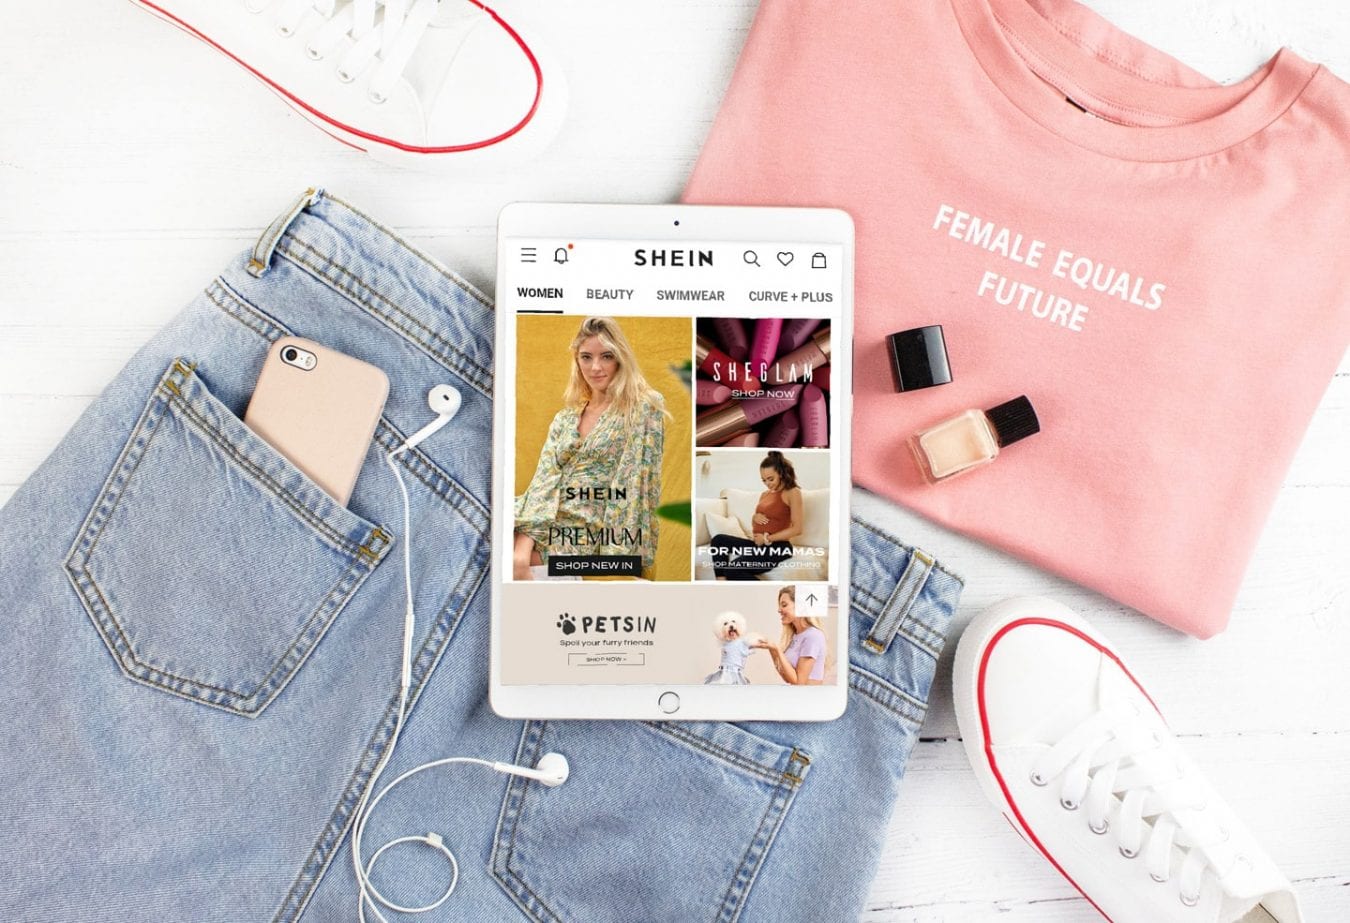 Shein. Top 10 Best Online Shopping Sites for Women's Clothing - 16